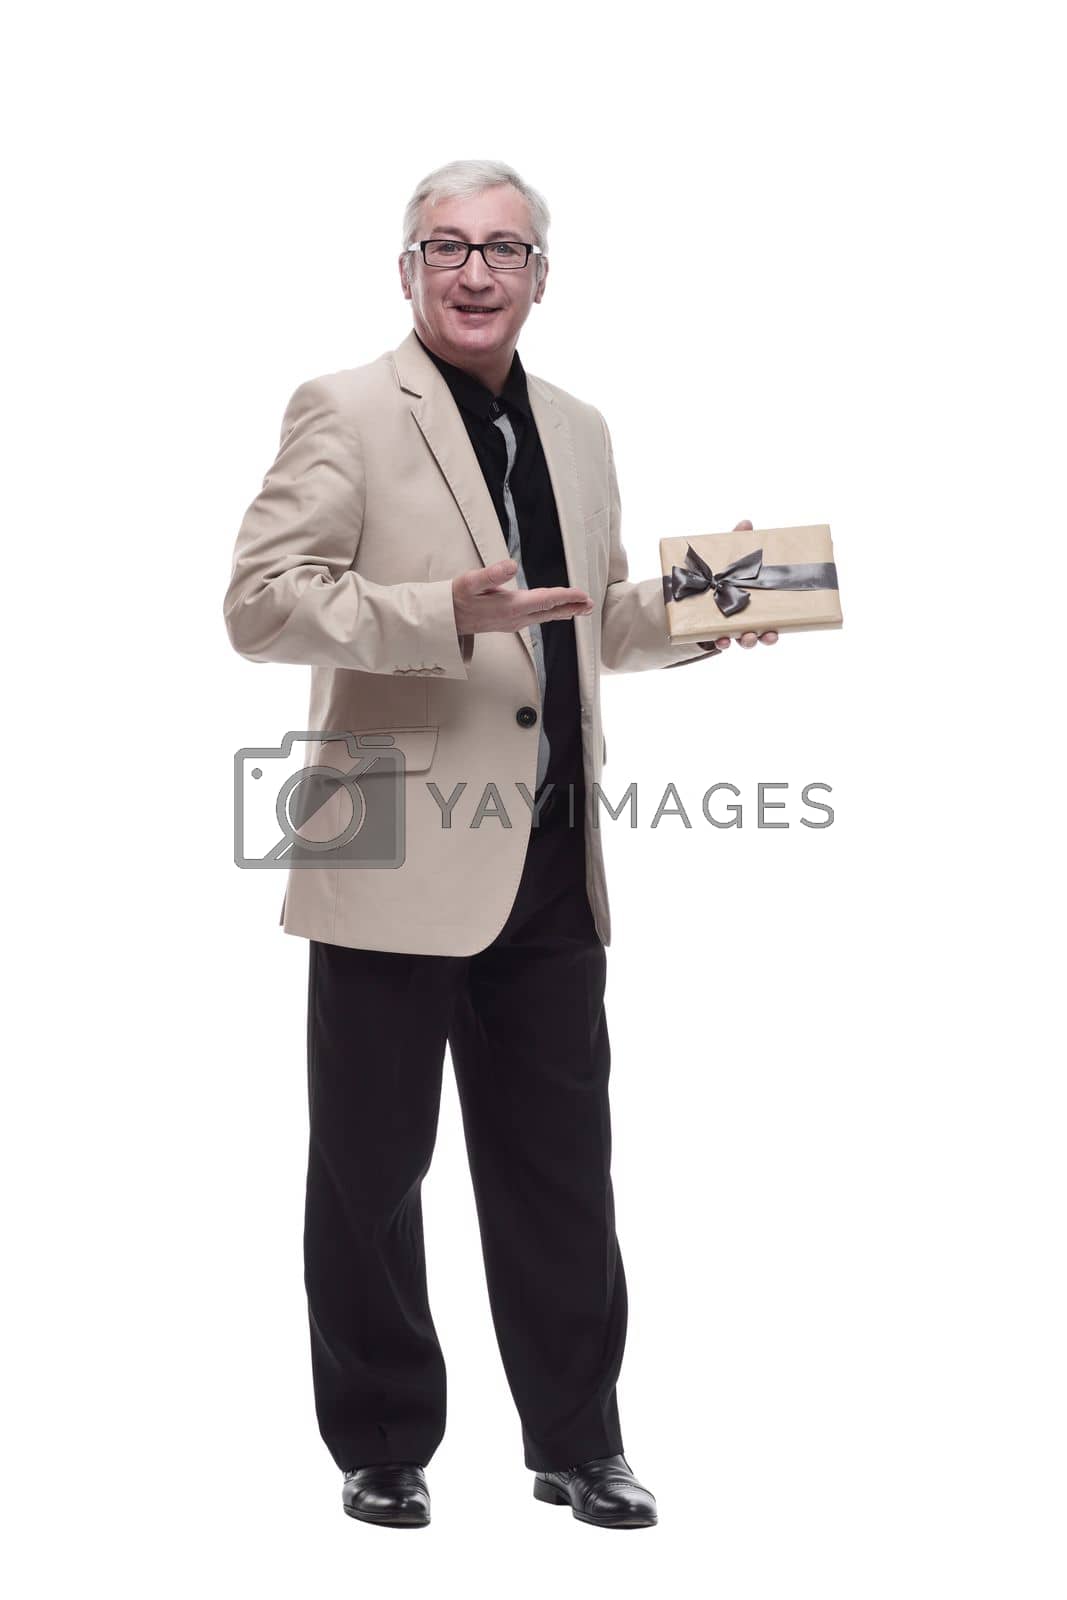 Royalty free image of in full growth. Mature intelligent man with a gift box. by asdf